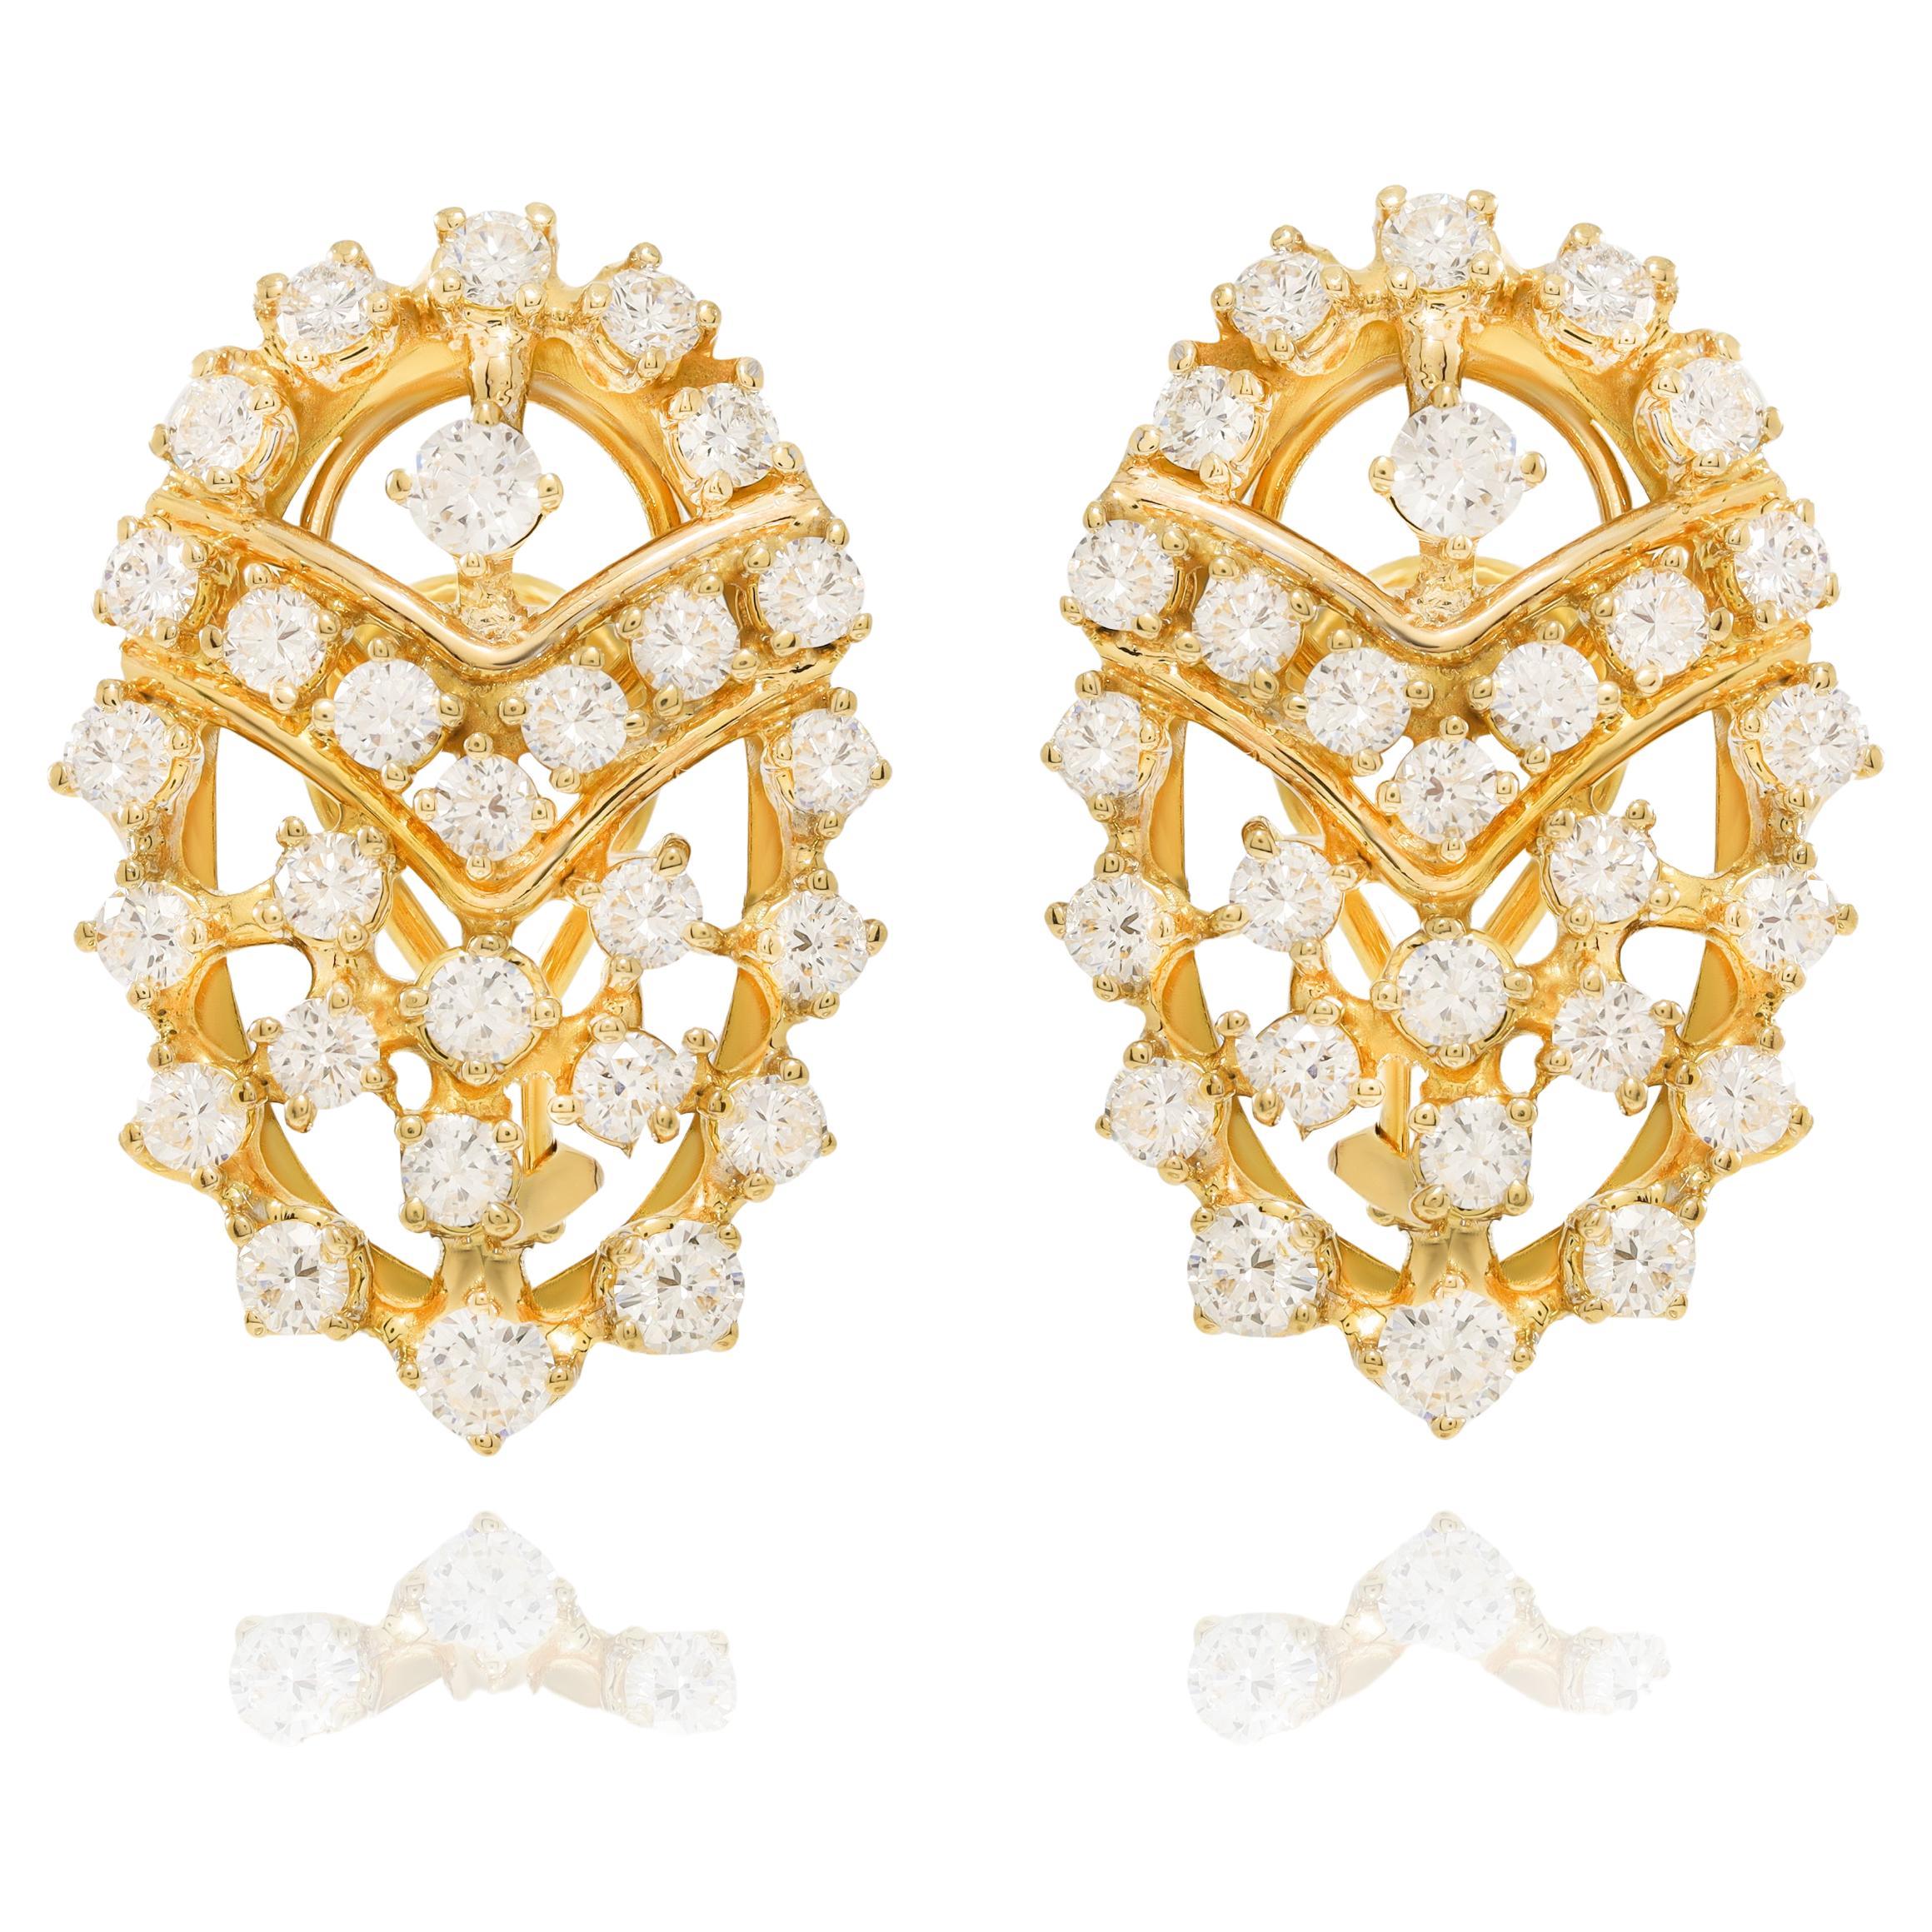 Diana M. 18 kt Yellow Gold Diamond Earrings Adorned with 5.00 cts tw of Diamonds